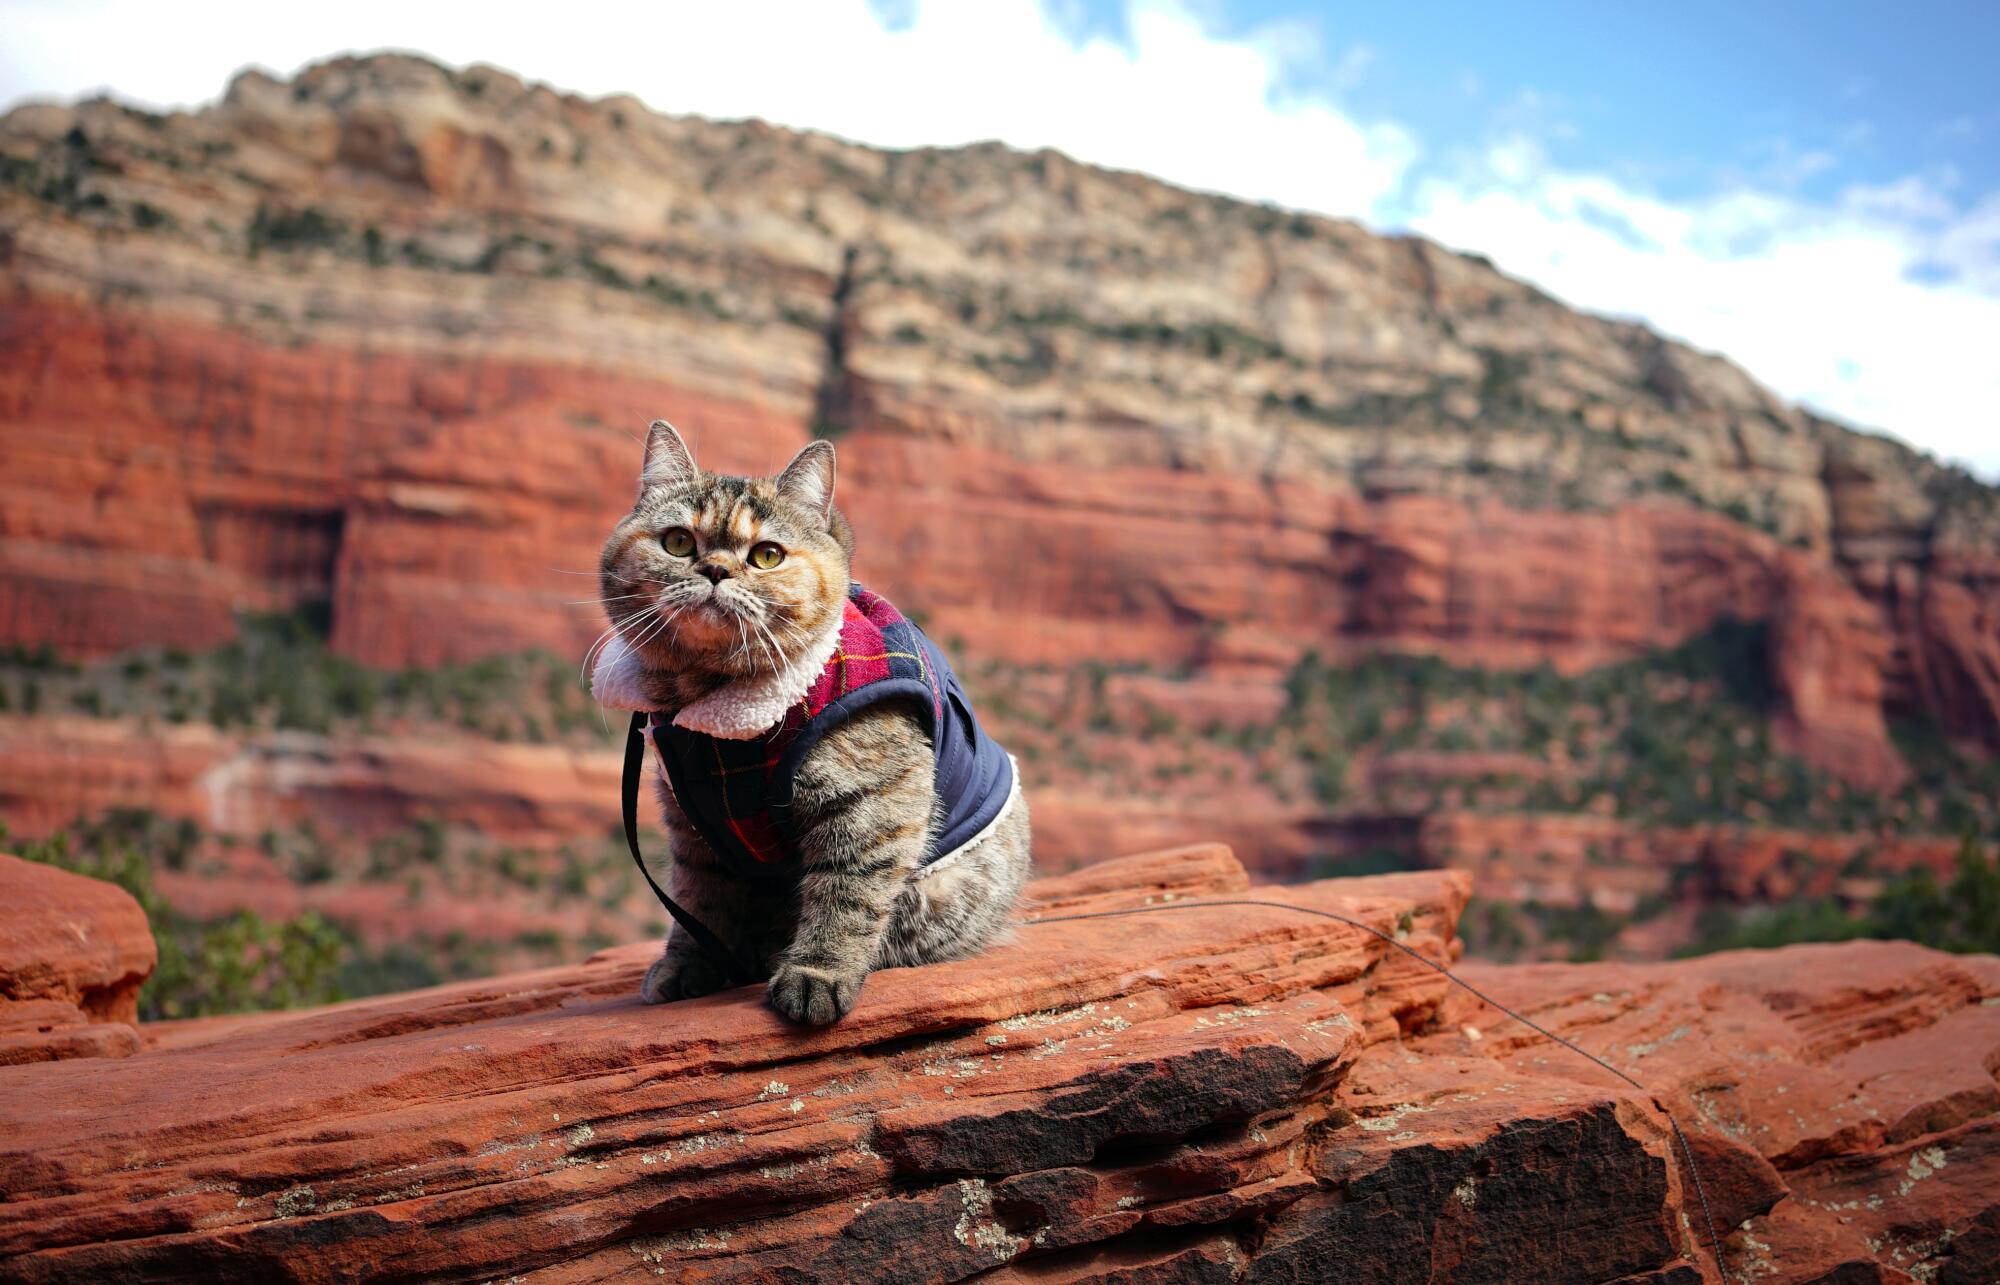 A cat wearing a vest visits the red rocks of Sedona, Arizona.